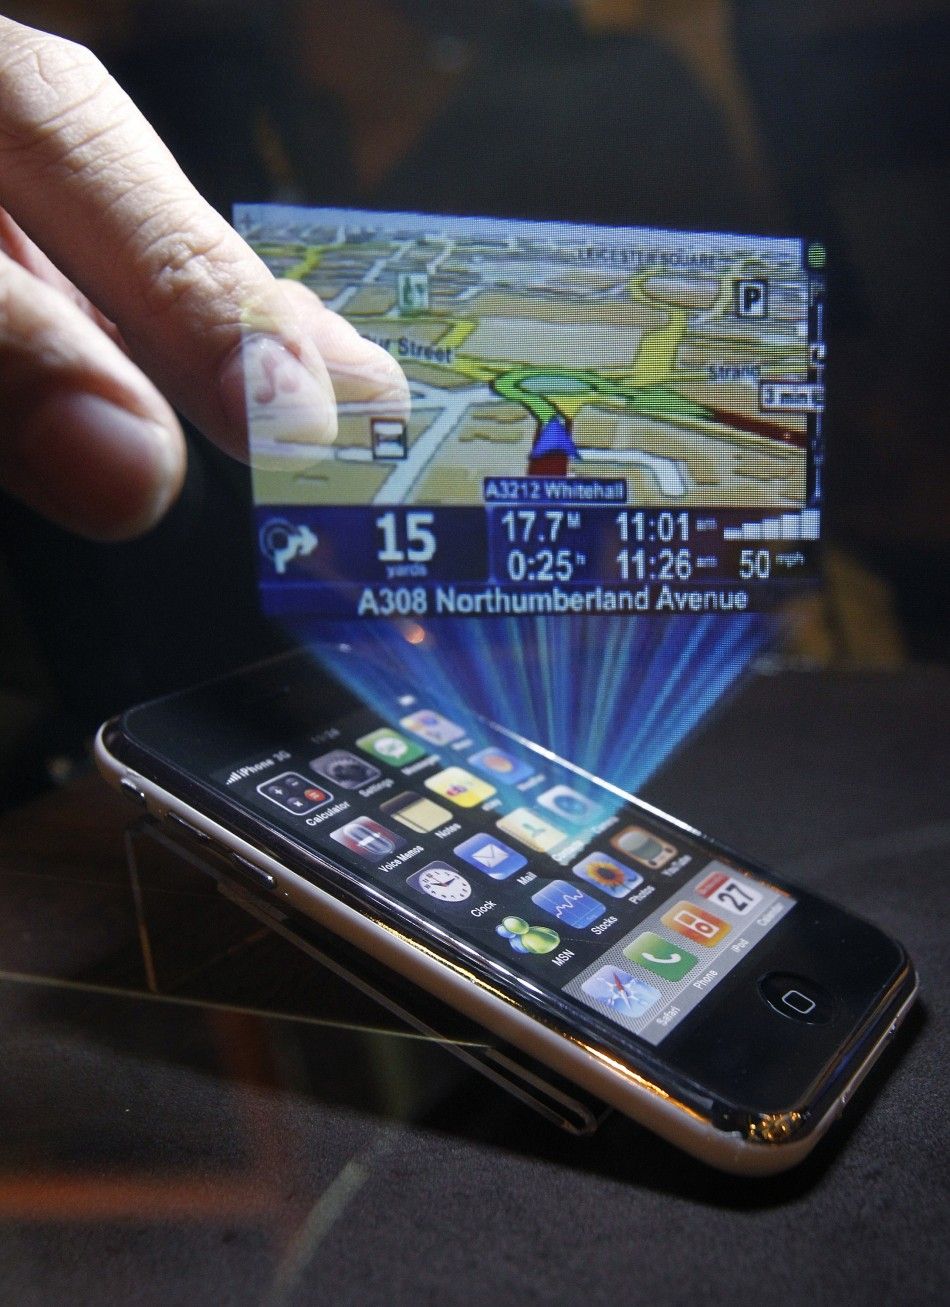  A holograph is projected above a mobile phone by a 3D projecter not pictured displayed in the Innovision booth at the Computex 2010 computer fair in Taipei